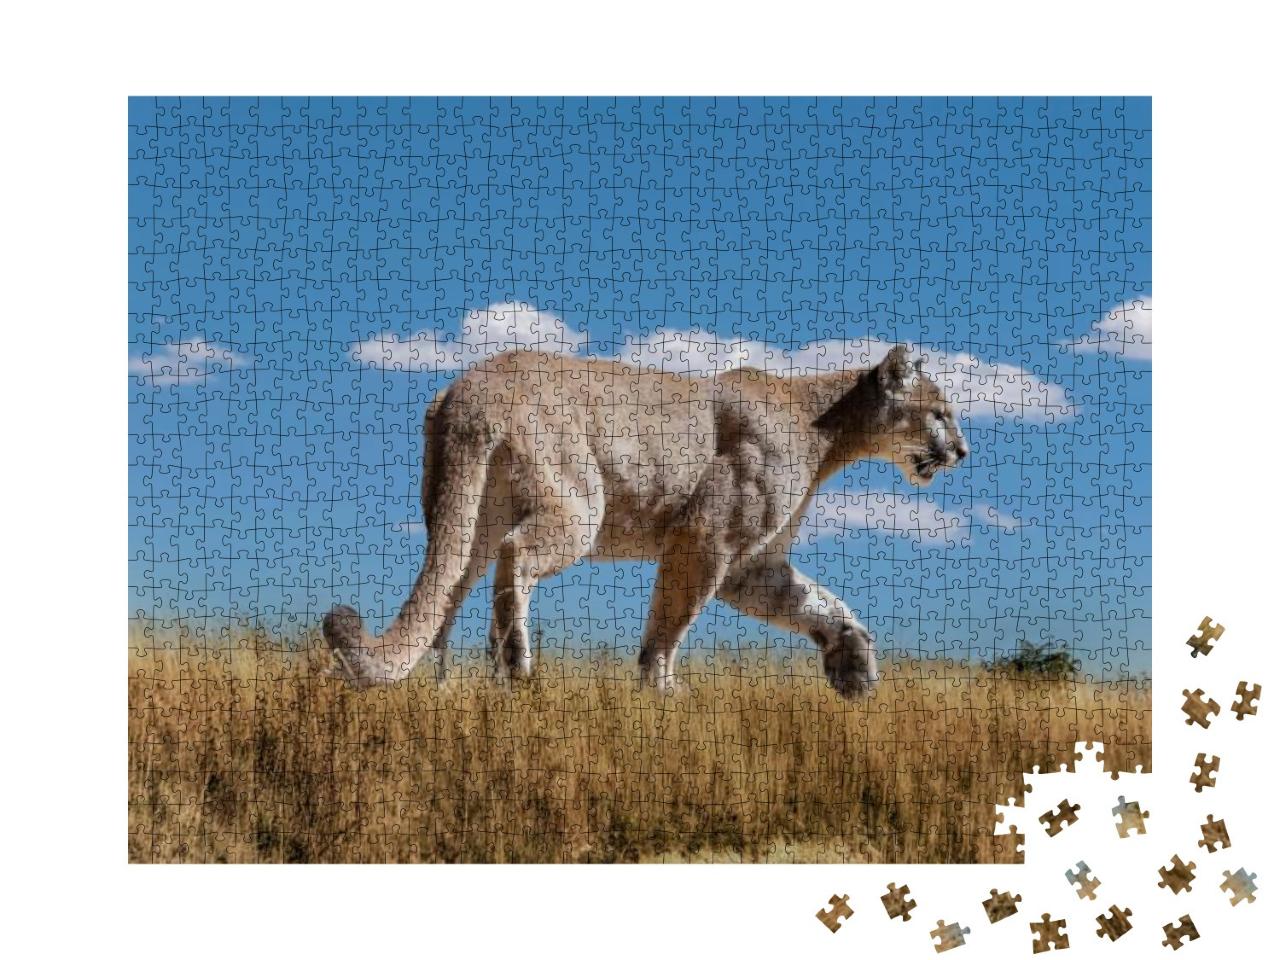 Female Mountain Lion Walking Through a Dry Field... Jigsaw Puzzle with 1000 pieces